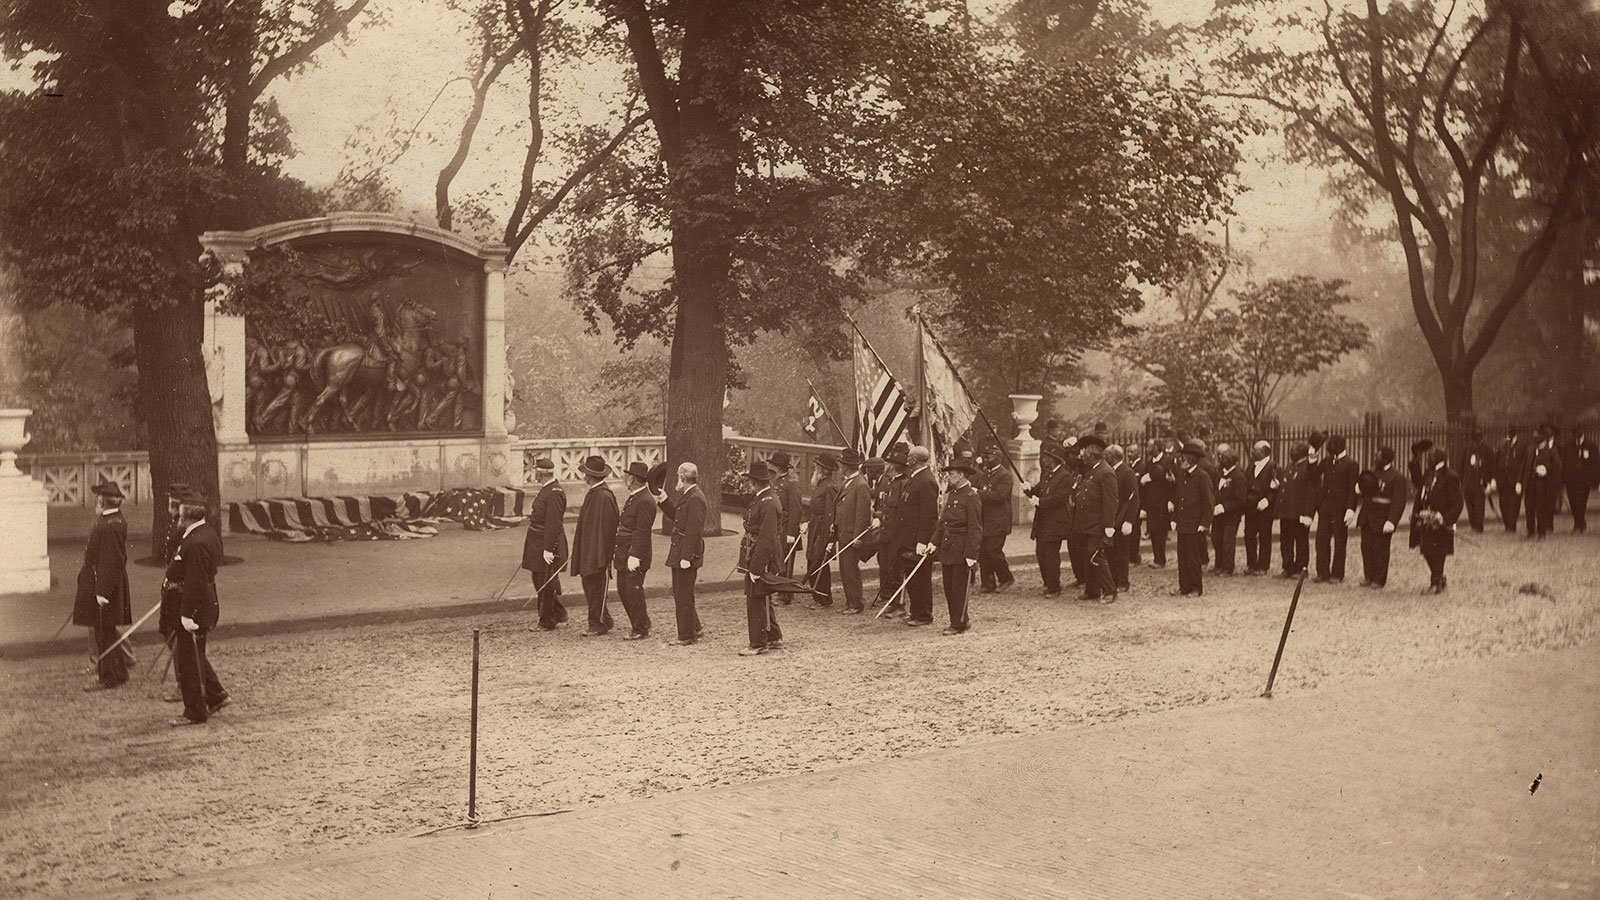 Dedication of the Memorial to Robert Gould Shaw and the Fifty-fourth Massachusetts Regiment